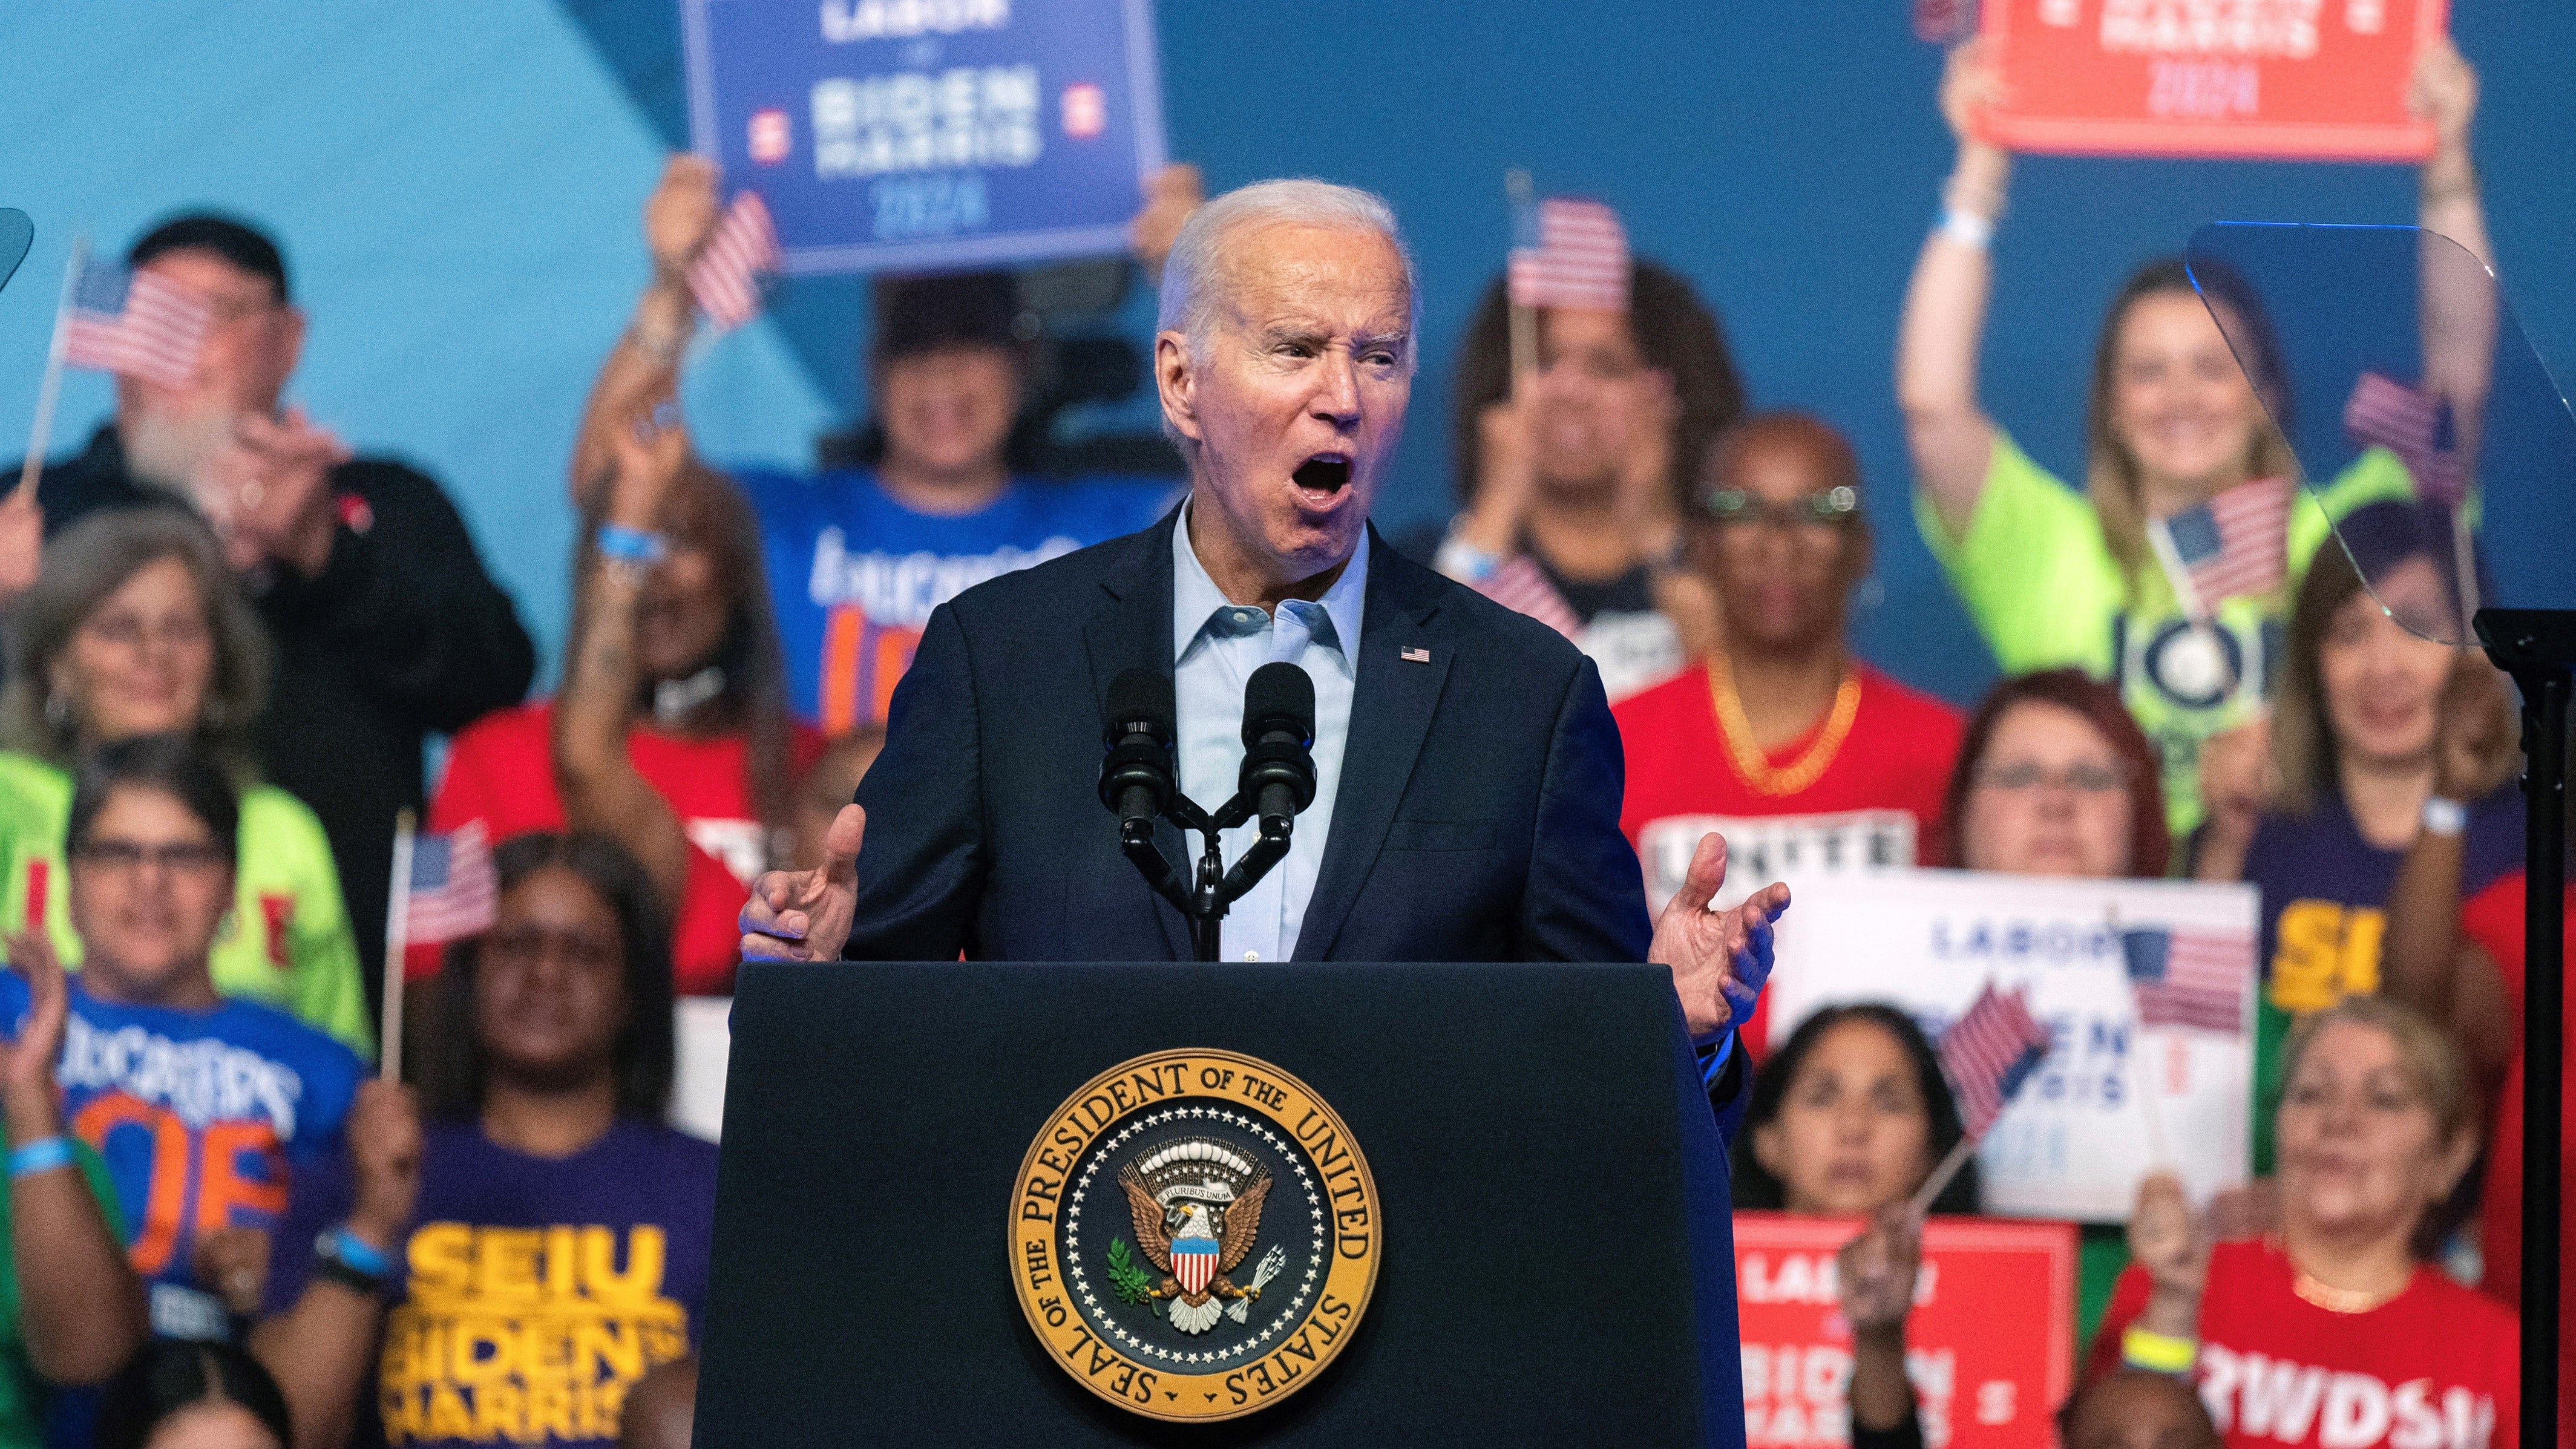 Look for the union label attached to Biden, it’s making life hard for workers this Labor Day